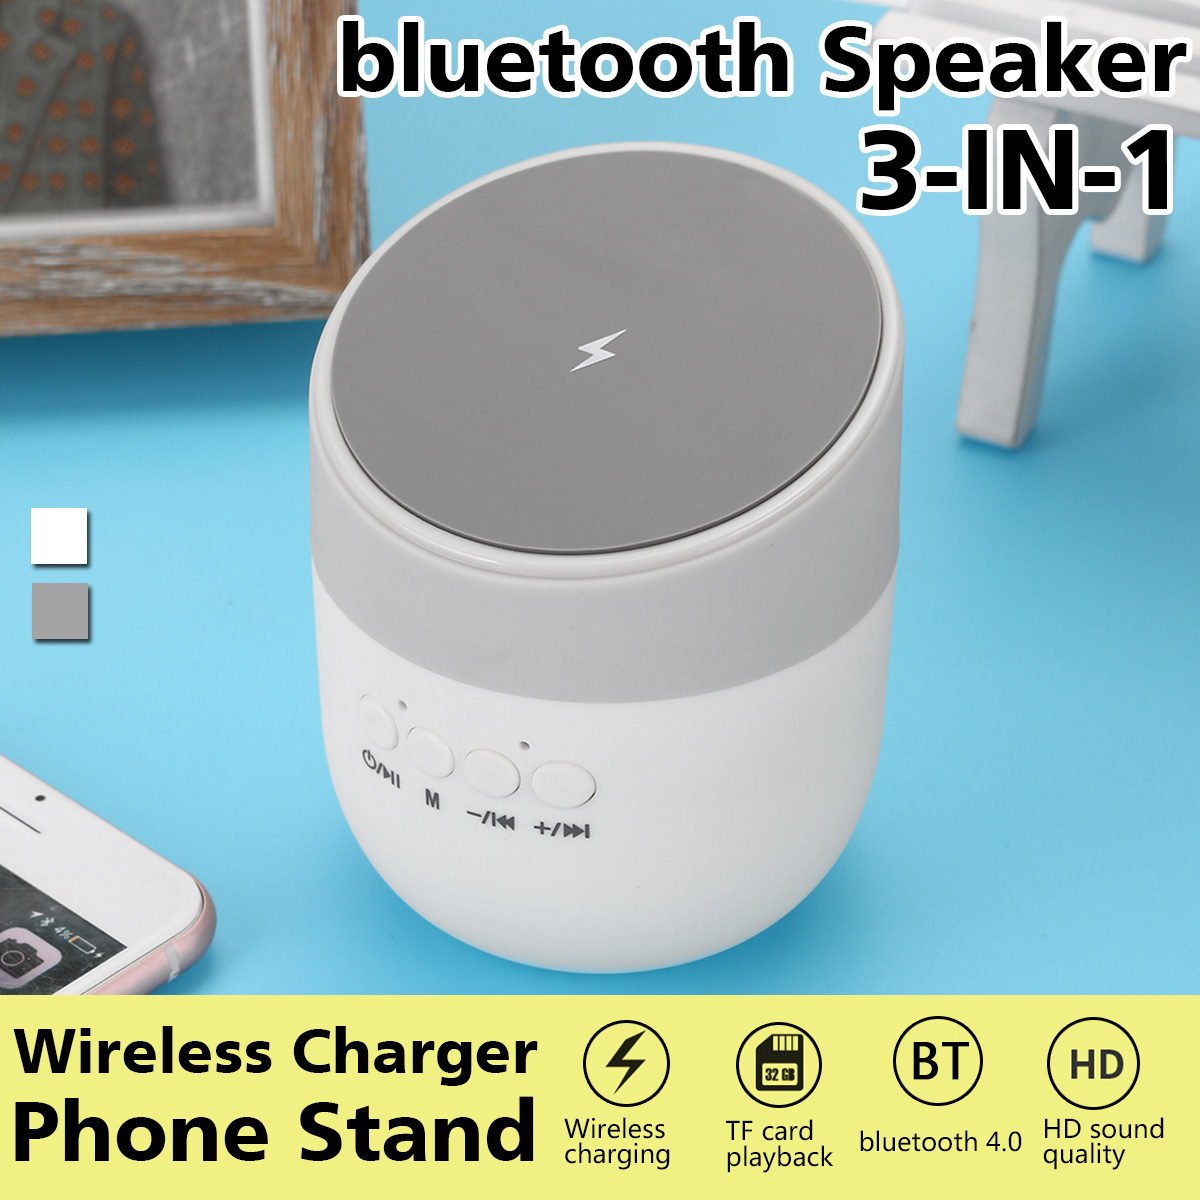 3-in-1-Qi-Wireless-Charging-Phone-Stand-TF-Card-Playback-HIFI-Stereo-bluetooth-Speaker-1652792-1